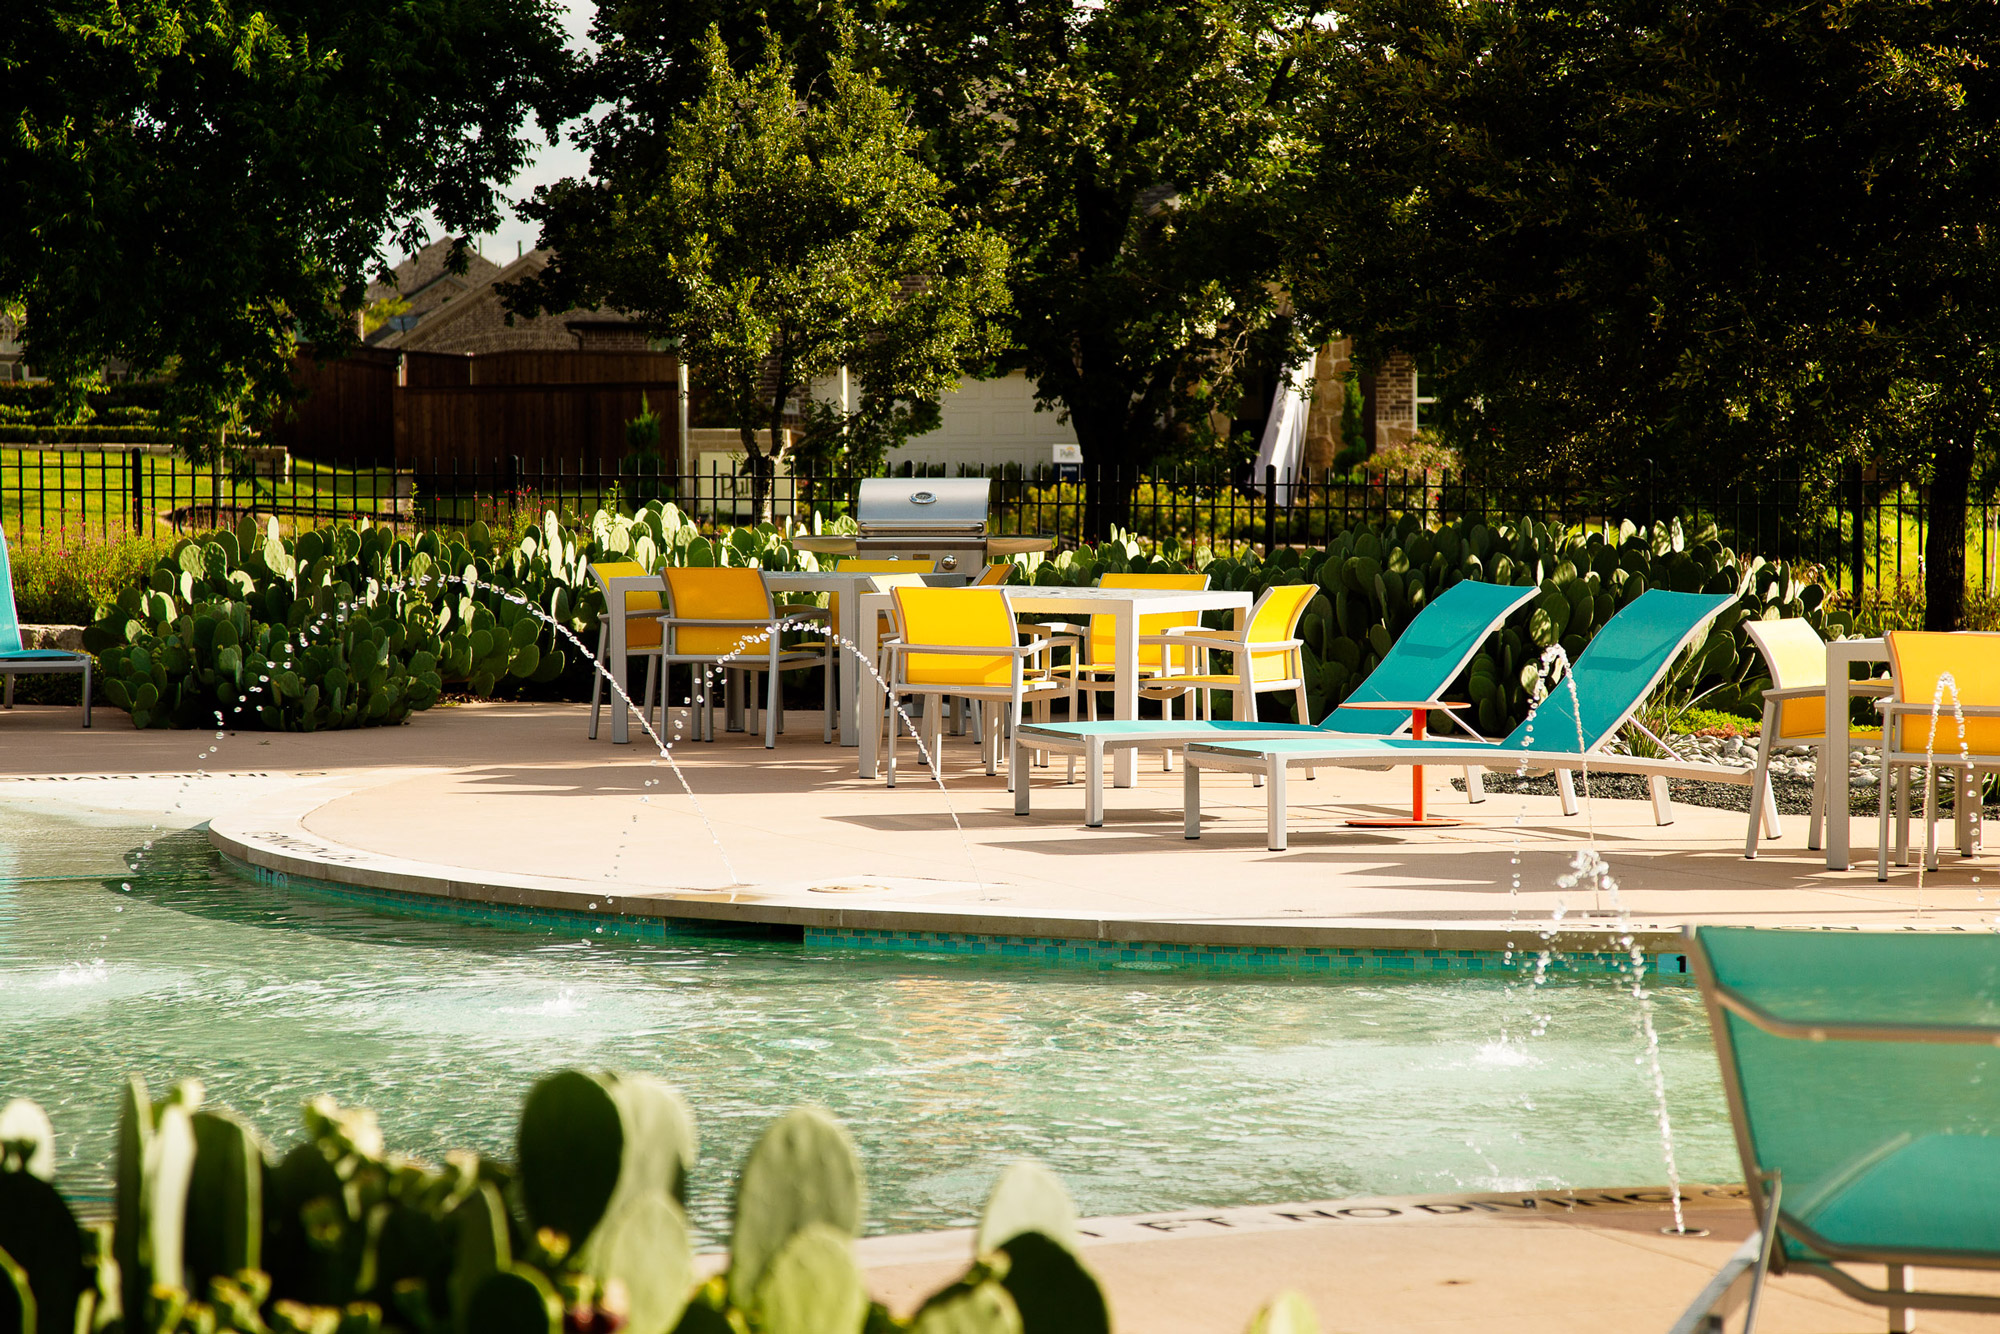 Plan a pool day so the entire family can relax and have fun.